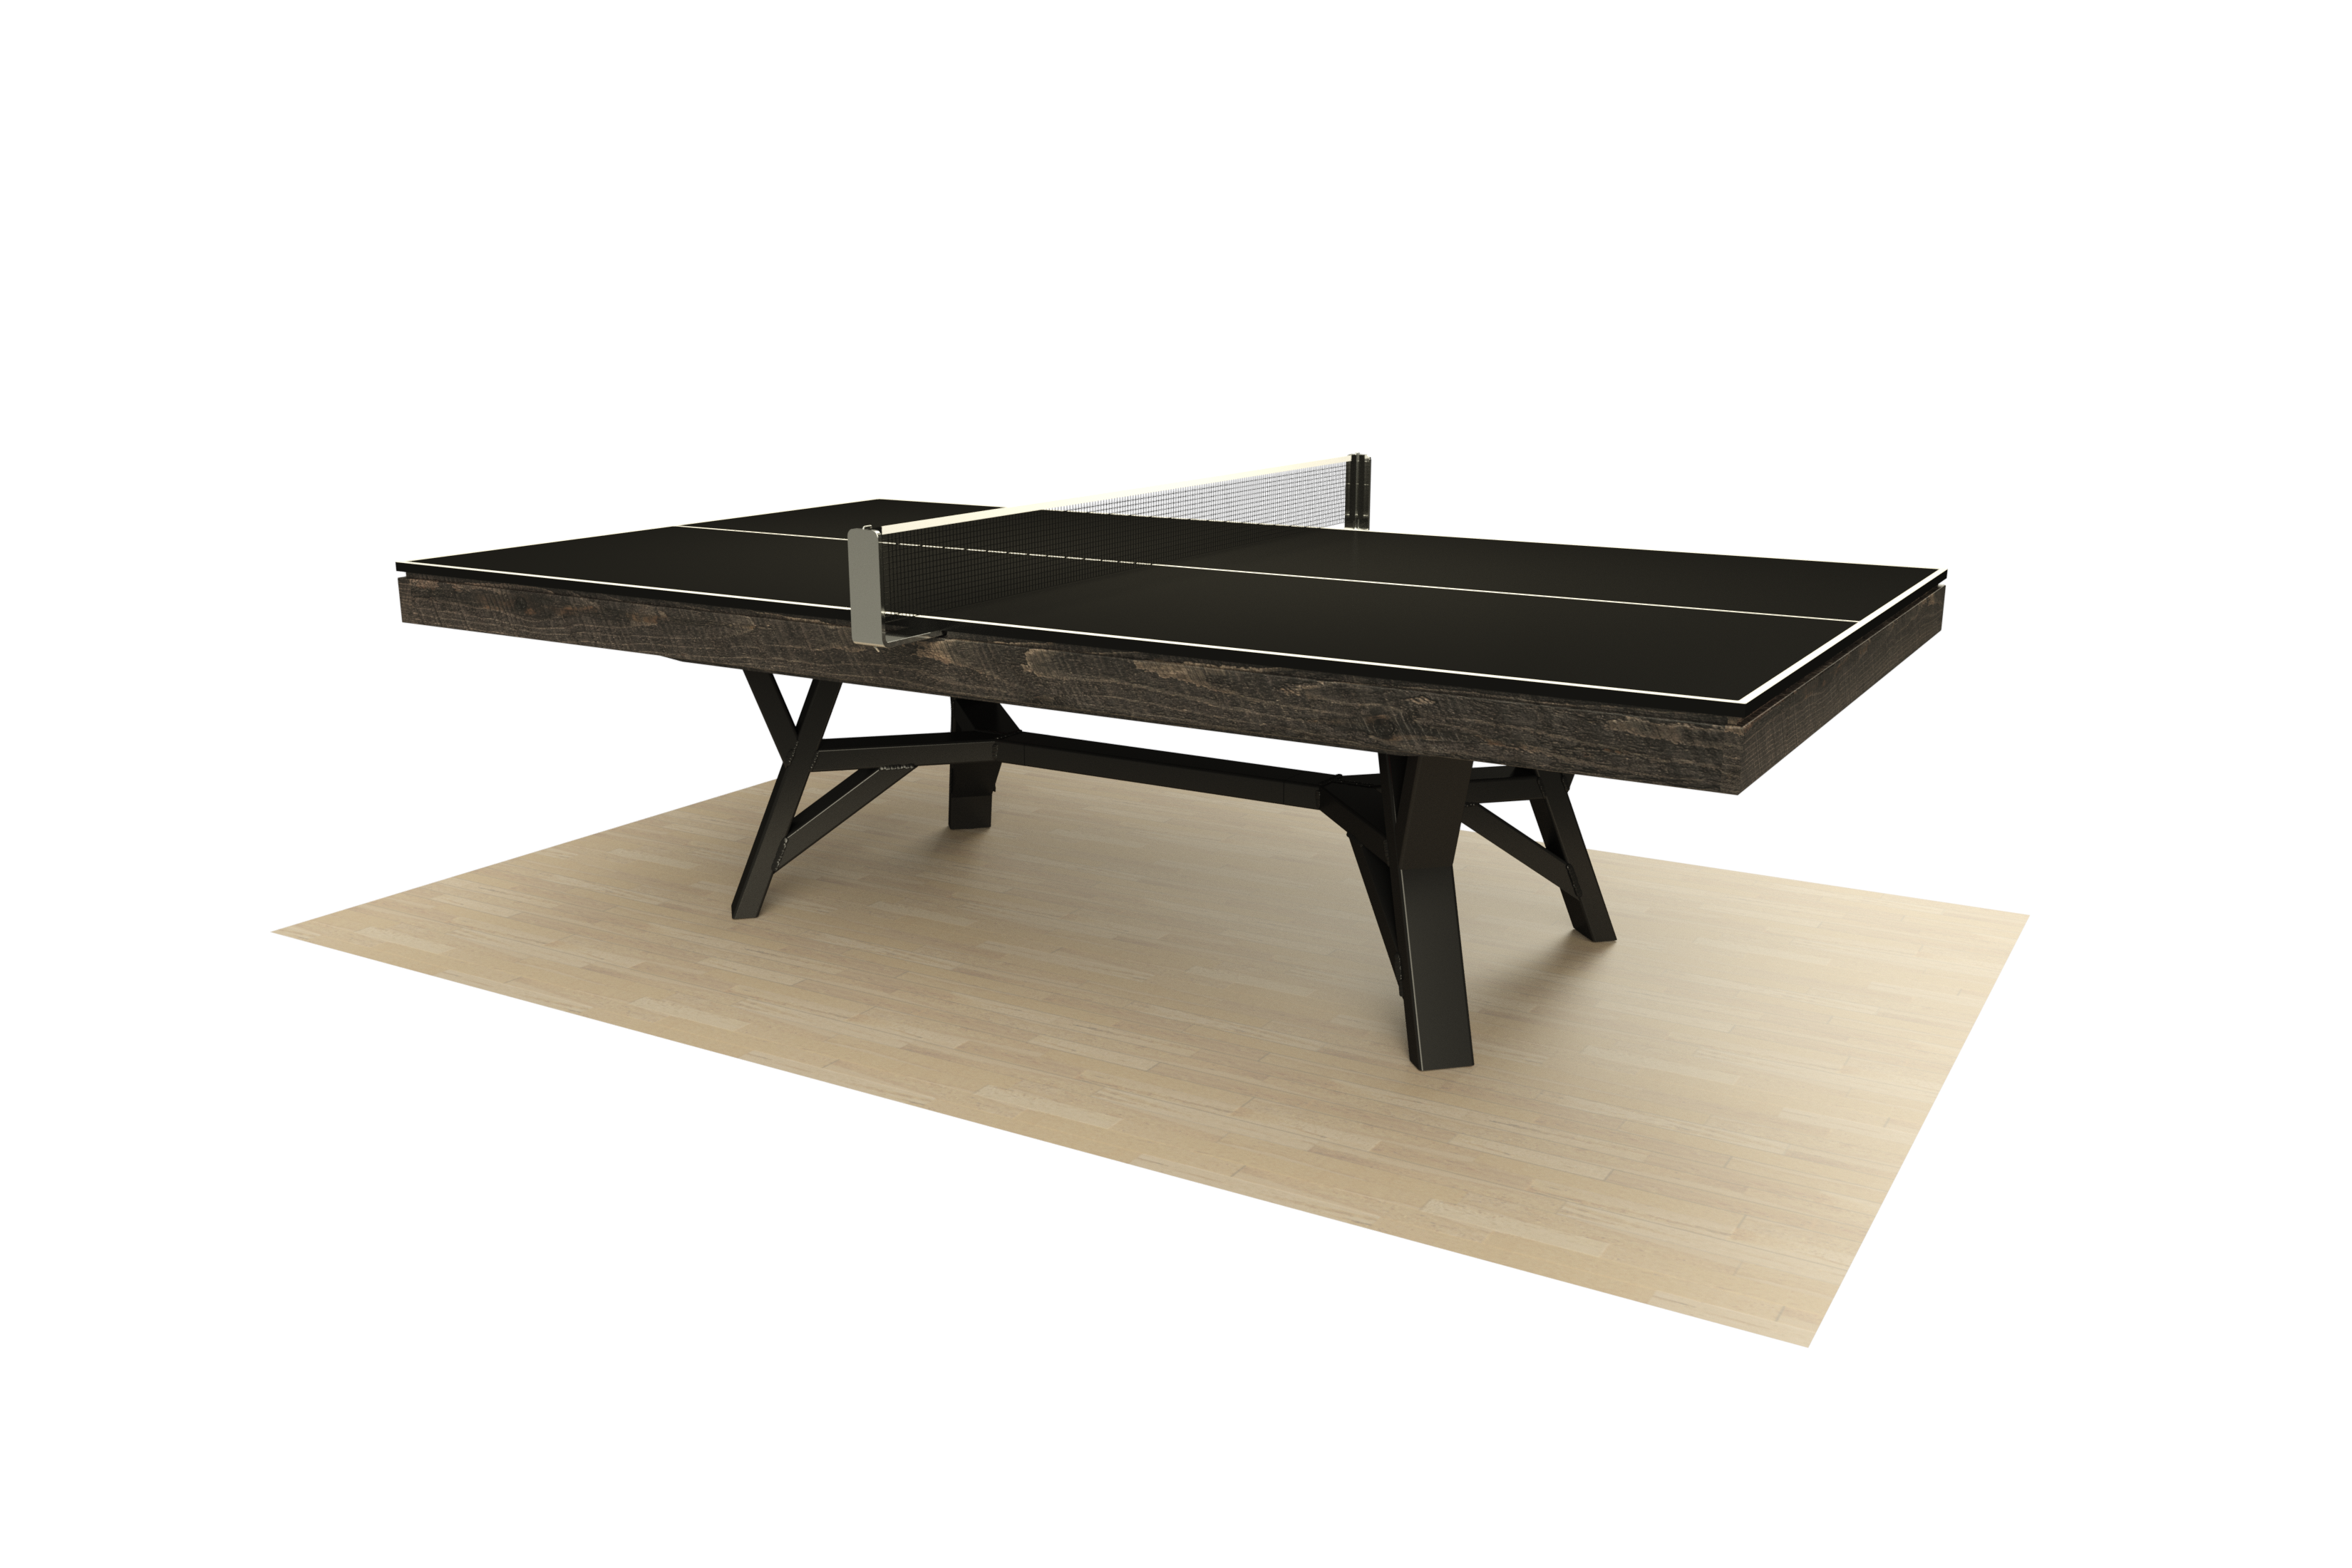 LA FORGE PING PONG TABLE